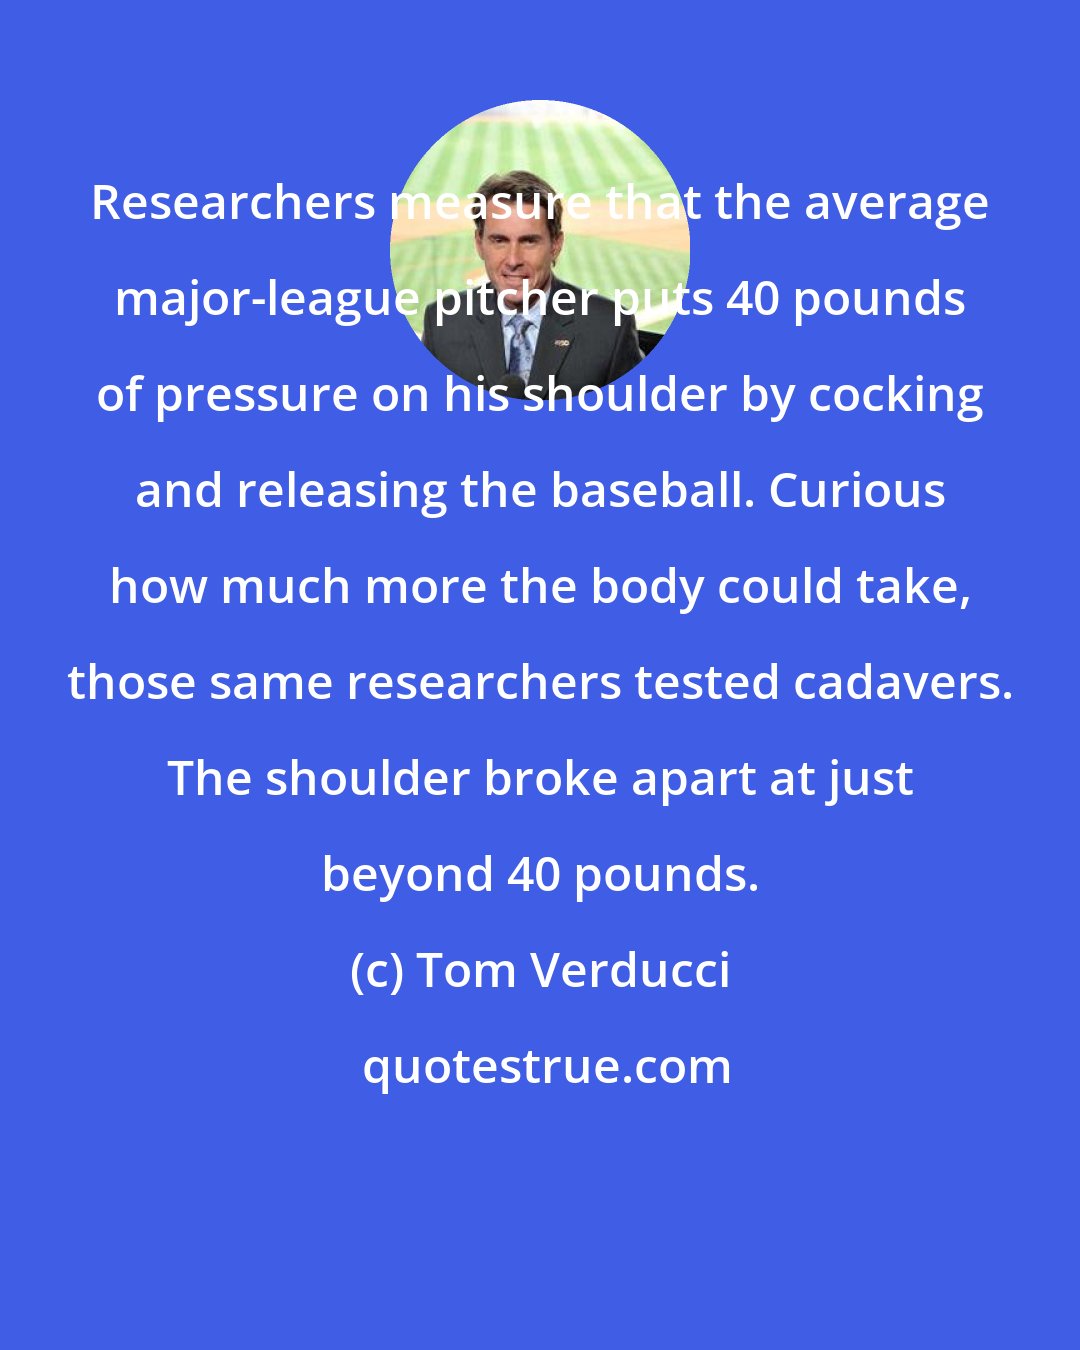 Tom Verducci: Researchers measure that the average major-league pitcher puts 40 pounds of pressure on his shoulder by cocking and releasing the baseball. Curious how much more the body could take, those same researchers tested cadavers. The shoulder broke apart at just beyond 40 pounds.